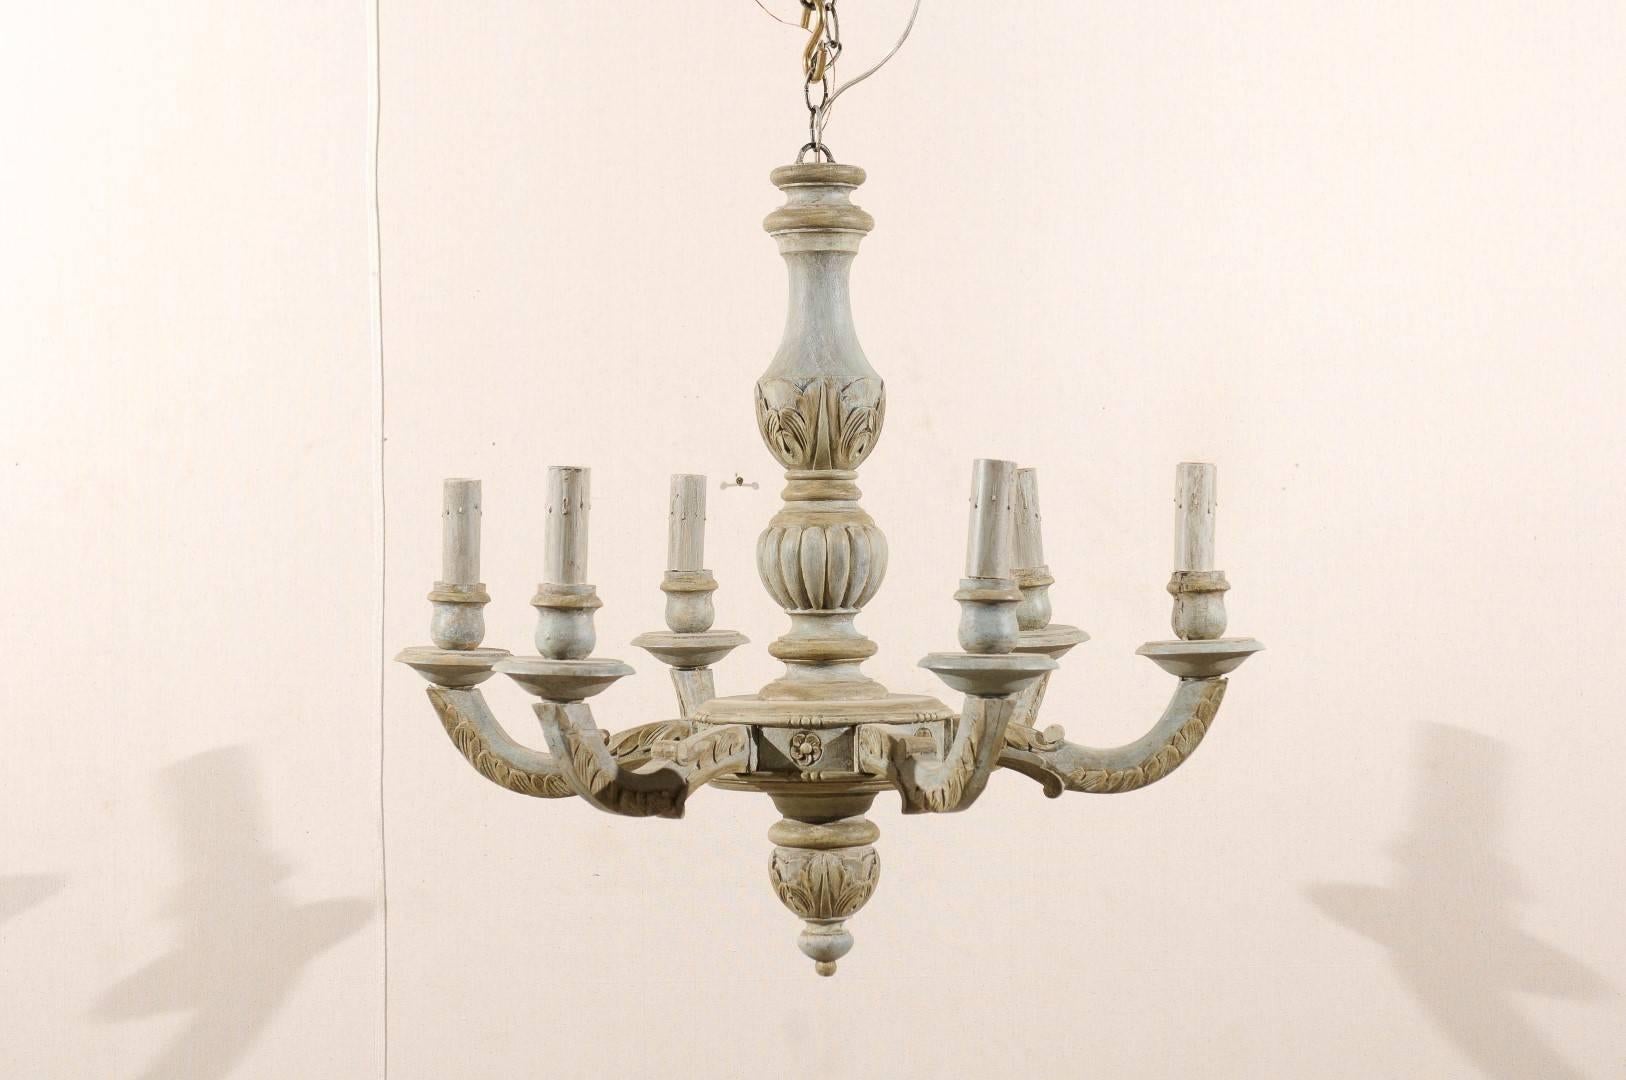 A French six-light carved and painted wood chandelier. This French vintage chandelier from the mid-20th century features a central carved column with stylized acanthus leaves and gadroon motifs. Six scrolled arms are connected to the central ring